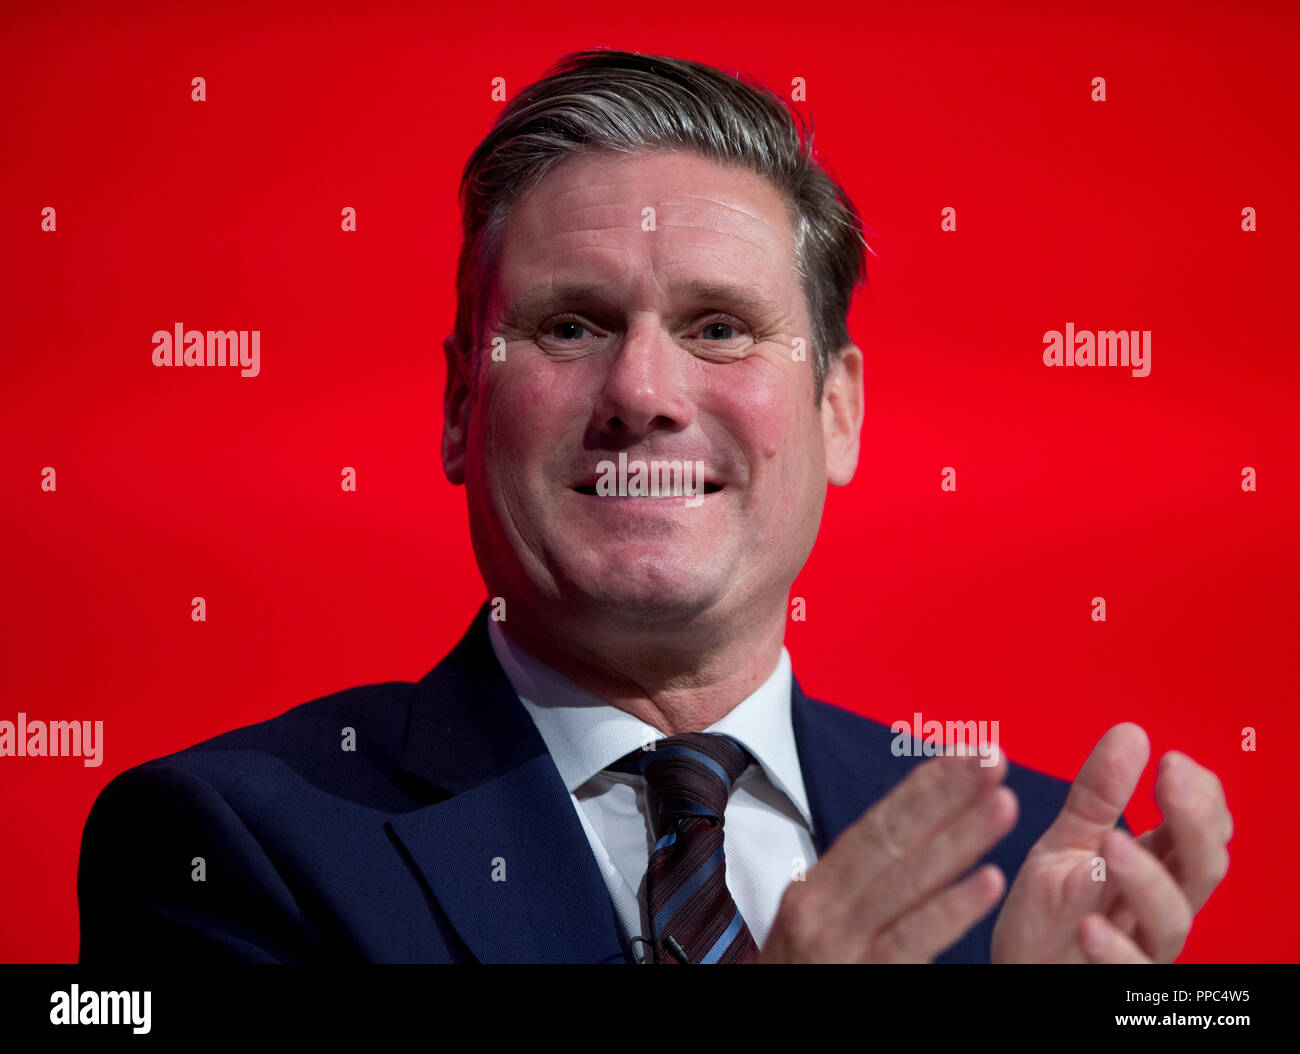 Liverpool, UK. 25th September 2018. Keir Starmer, Shadow Secretary of State for Exiting the European Union and Labour MP for Holborn and St Pancras speaks at the Labour Party Conference in Liverpool. © Russell Hart/Alamy Live News. Stock Photo